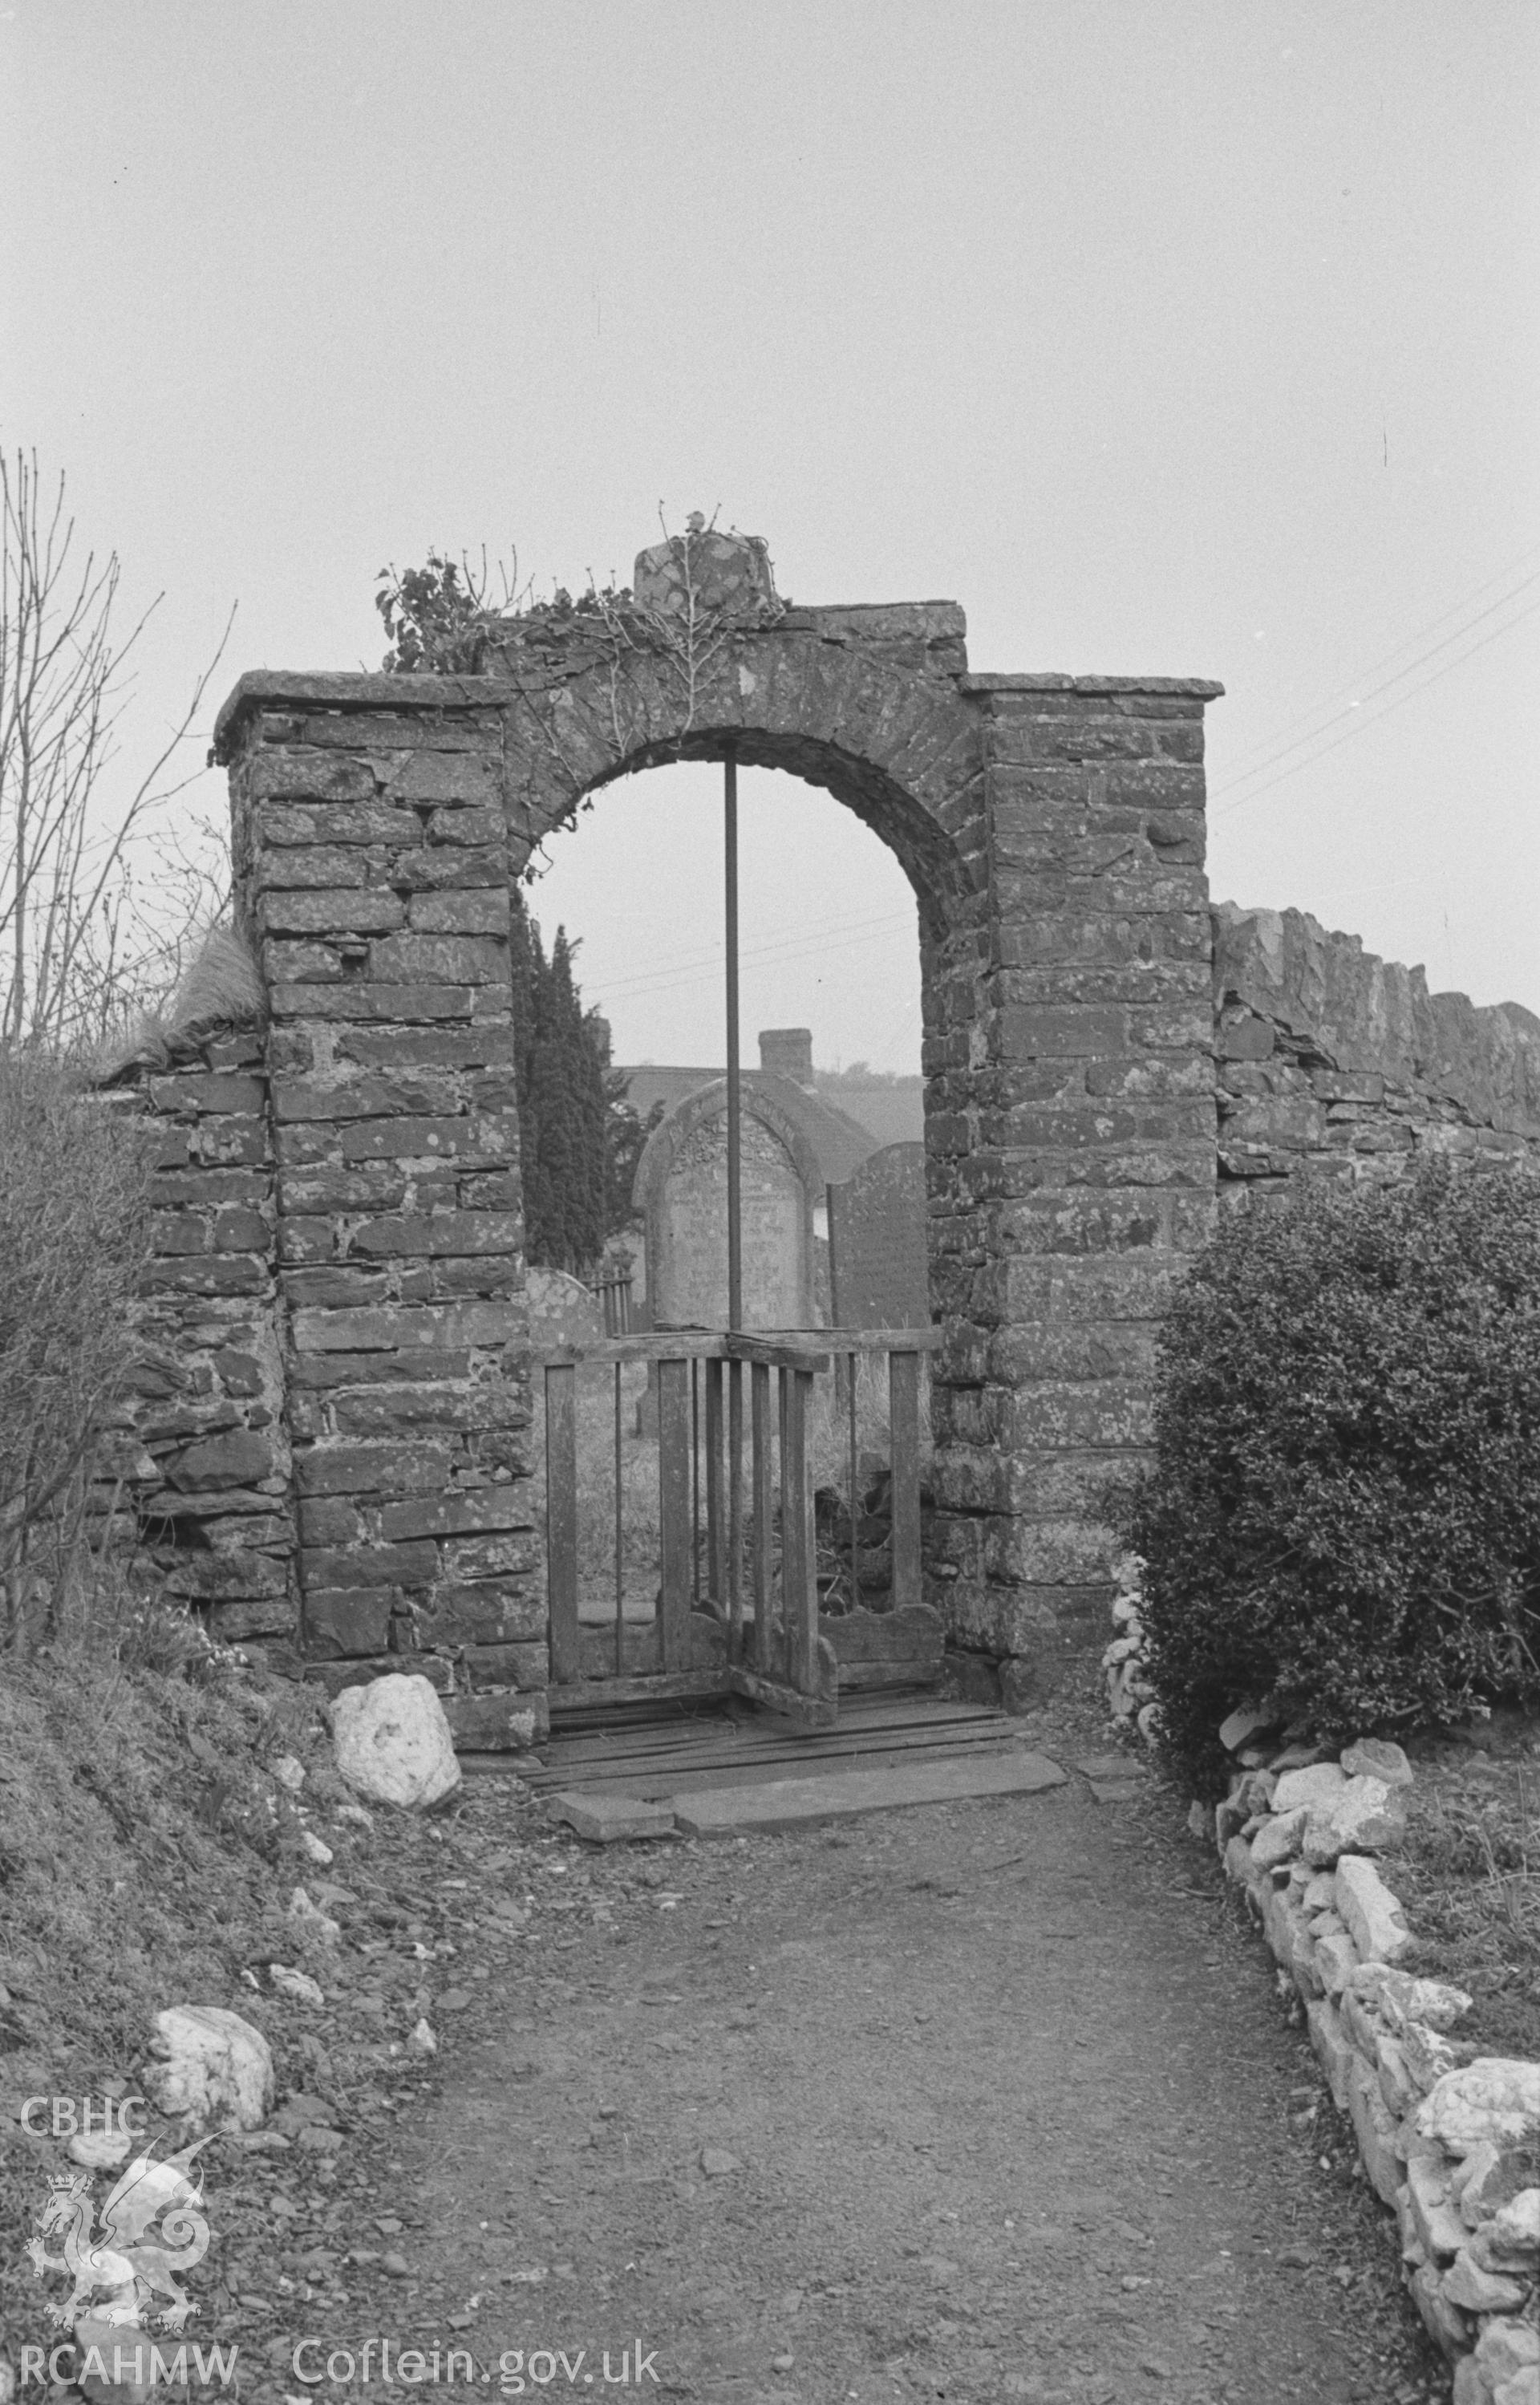 Black and White photograph of south-east gate of churchyard showing stem of Norman Font placed on top, with revolving gate below, Lledrod. Photographed by Arthur Chater in April 1963 at Grid Reference SN 646 702, looking north west.